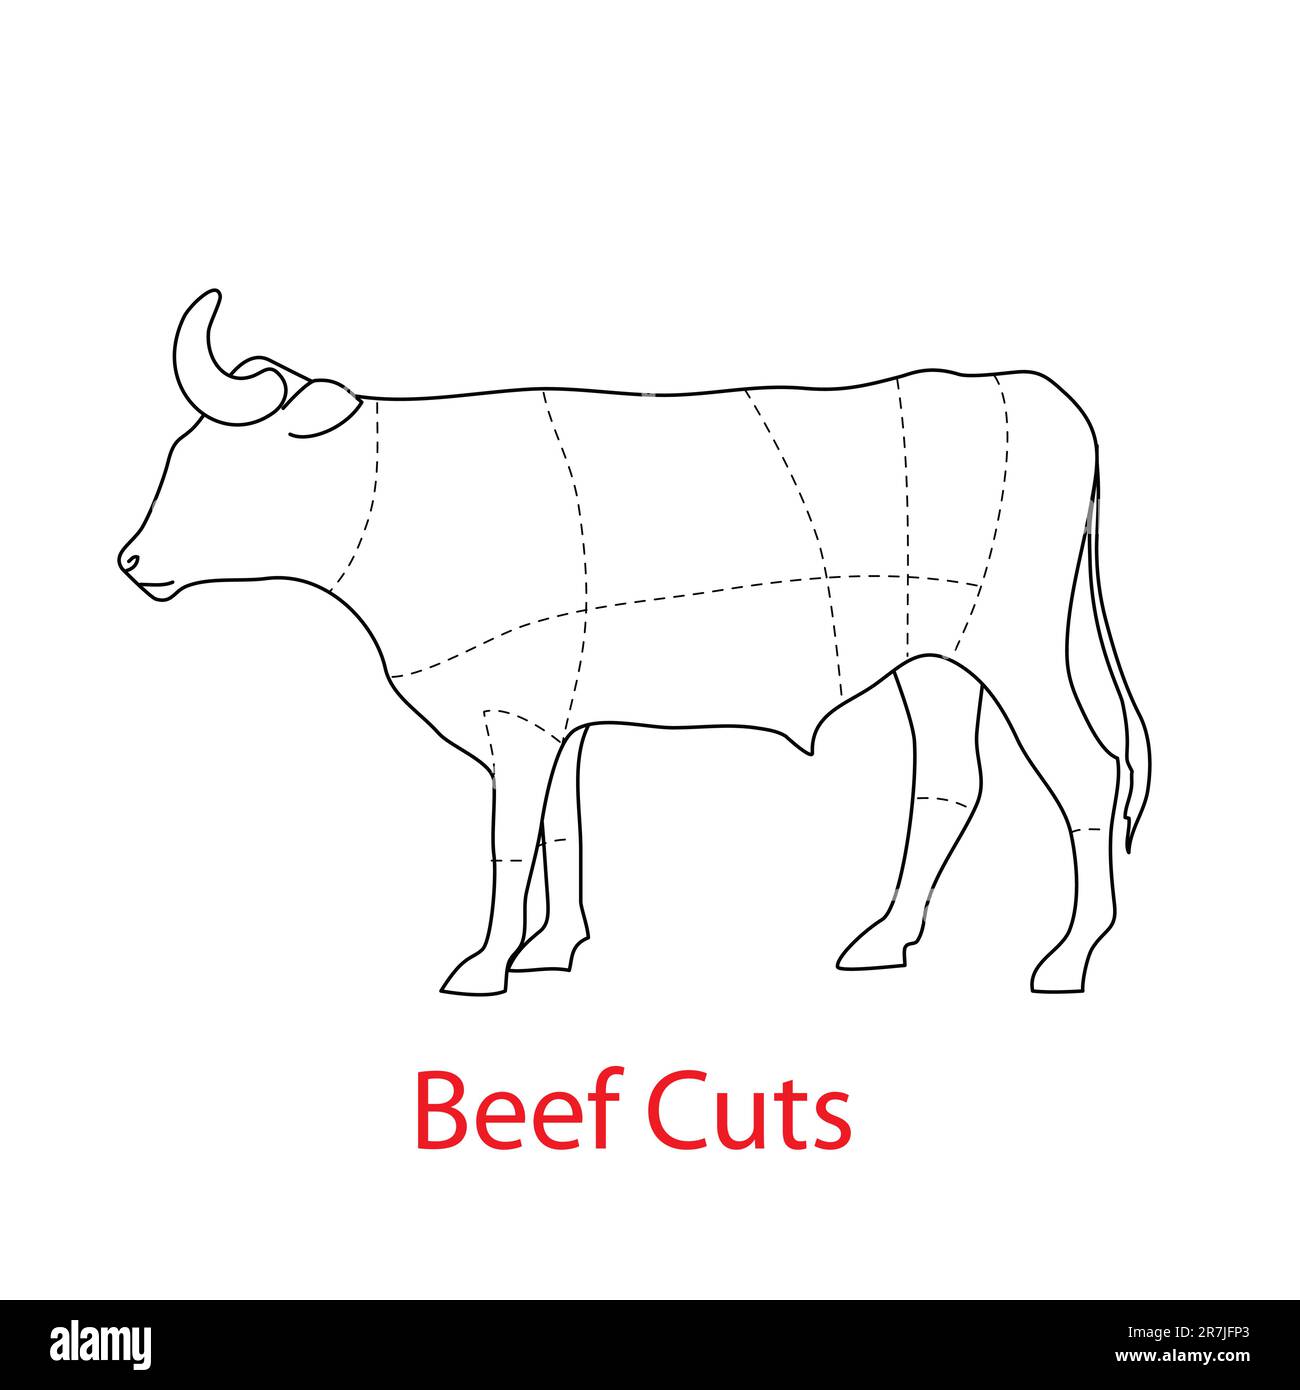 Scheme of the template - beef cuts. Stock Vector